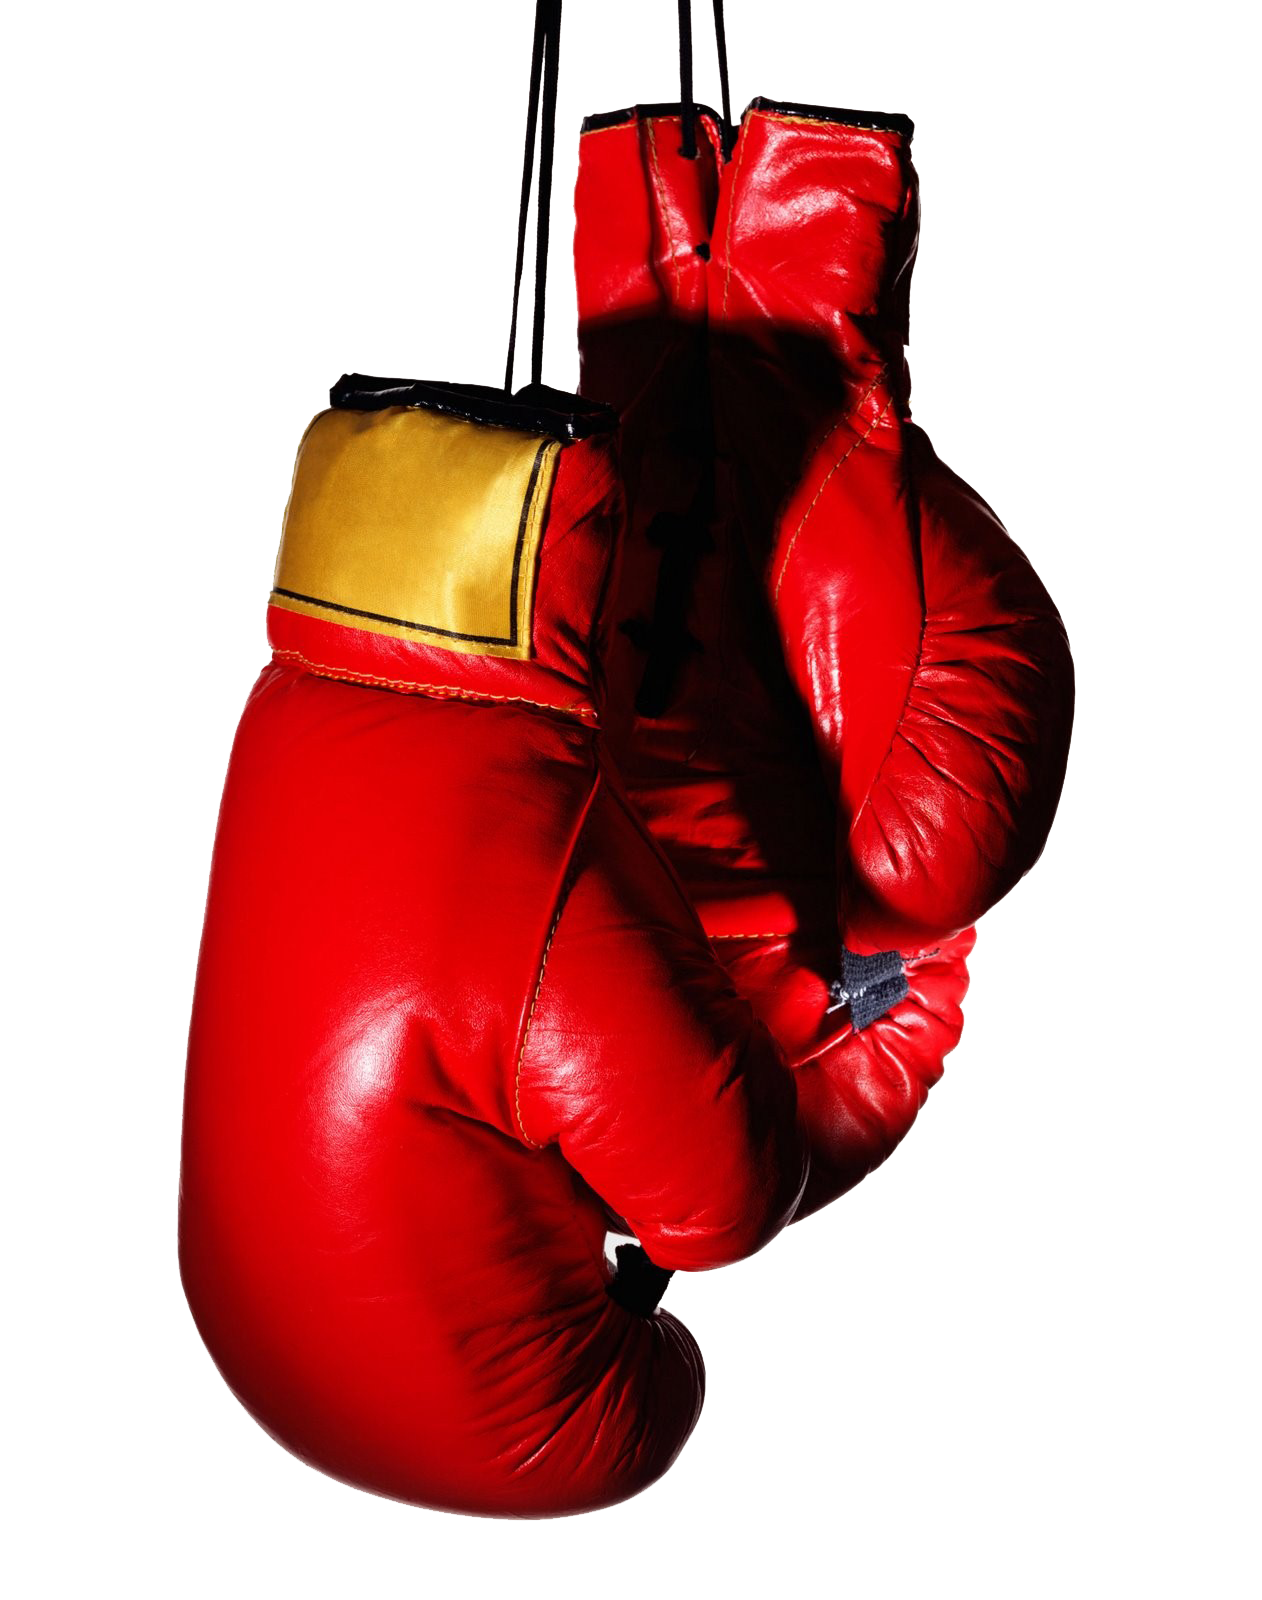 Boxing Silhouette Png Transparent Background Clipart Full - Riset